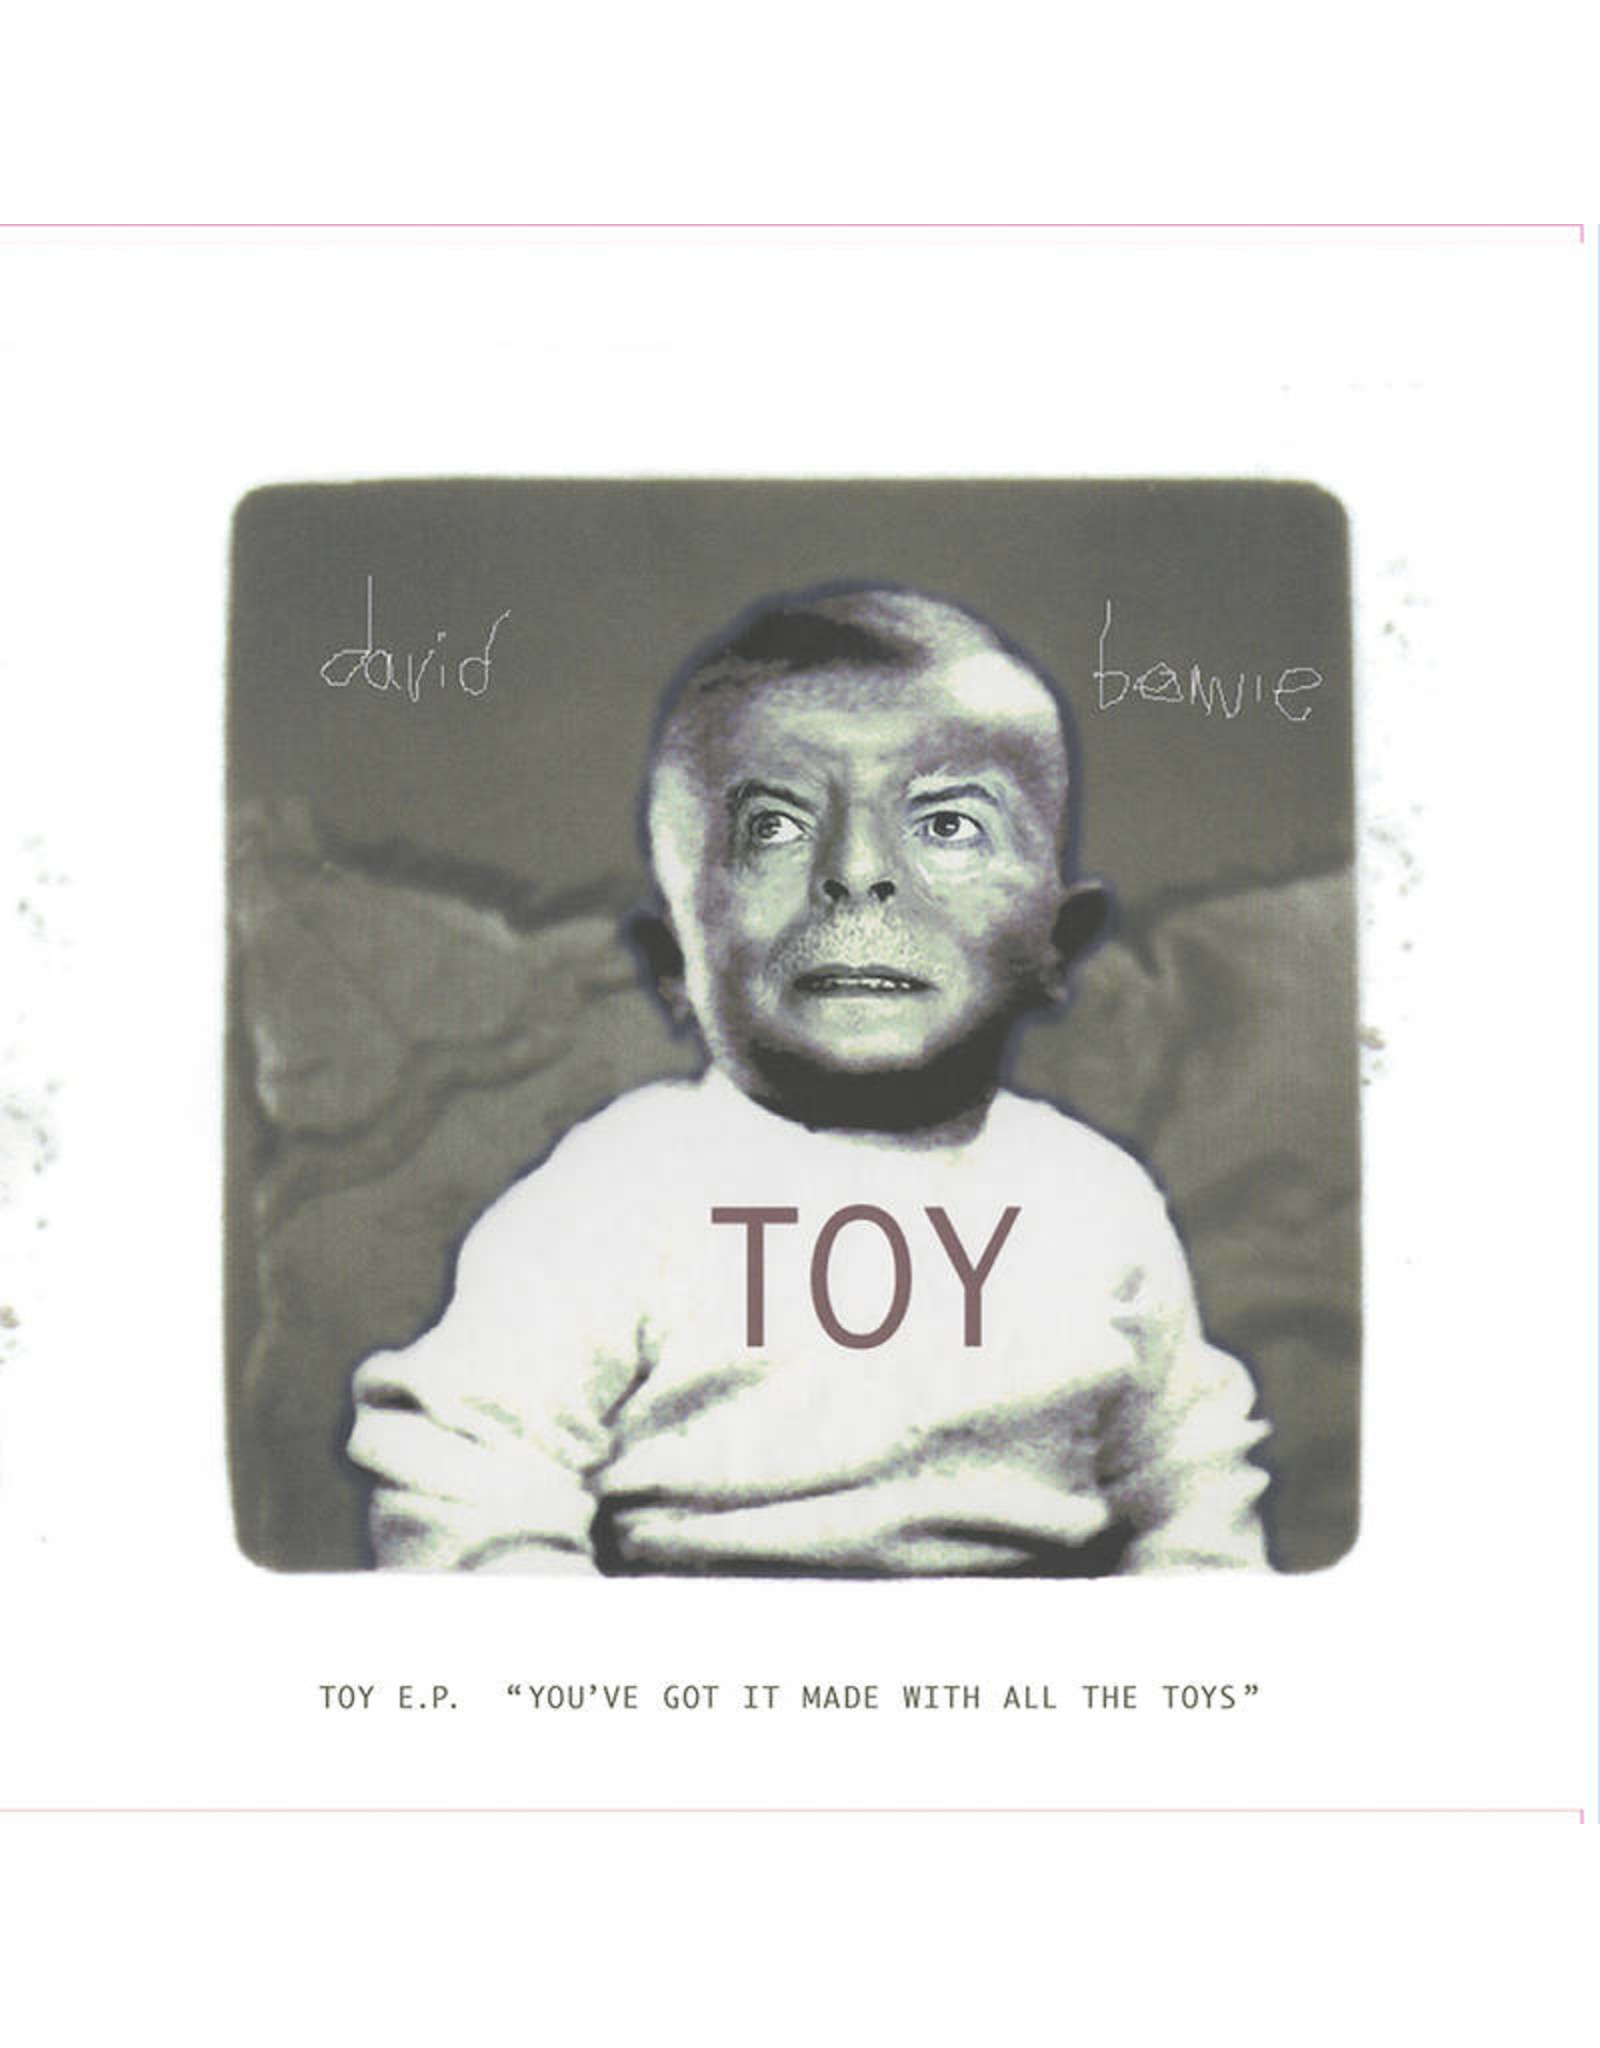 David Bowie - Toy EP (Record Store Day)